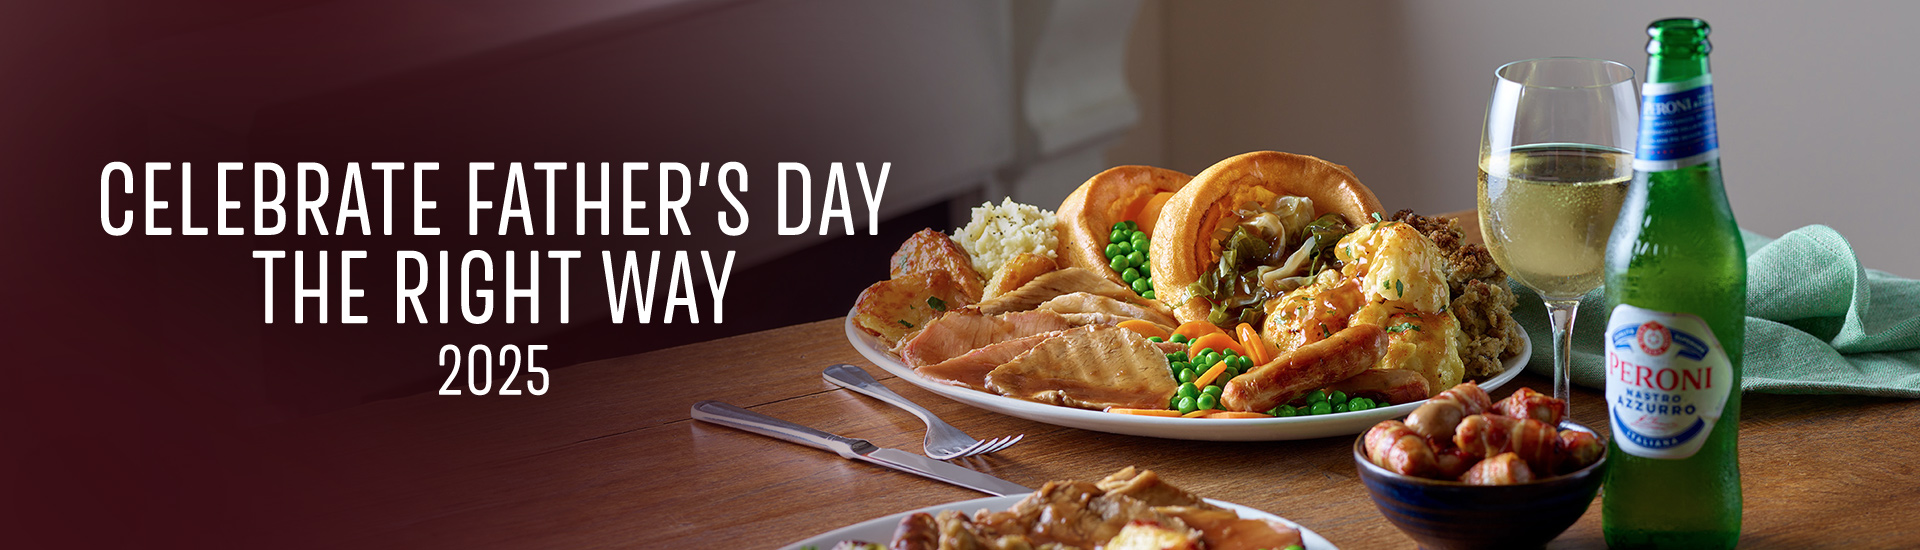 Father’s day carvery in Carlisle